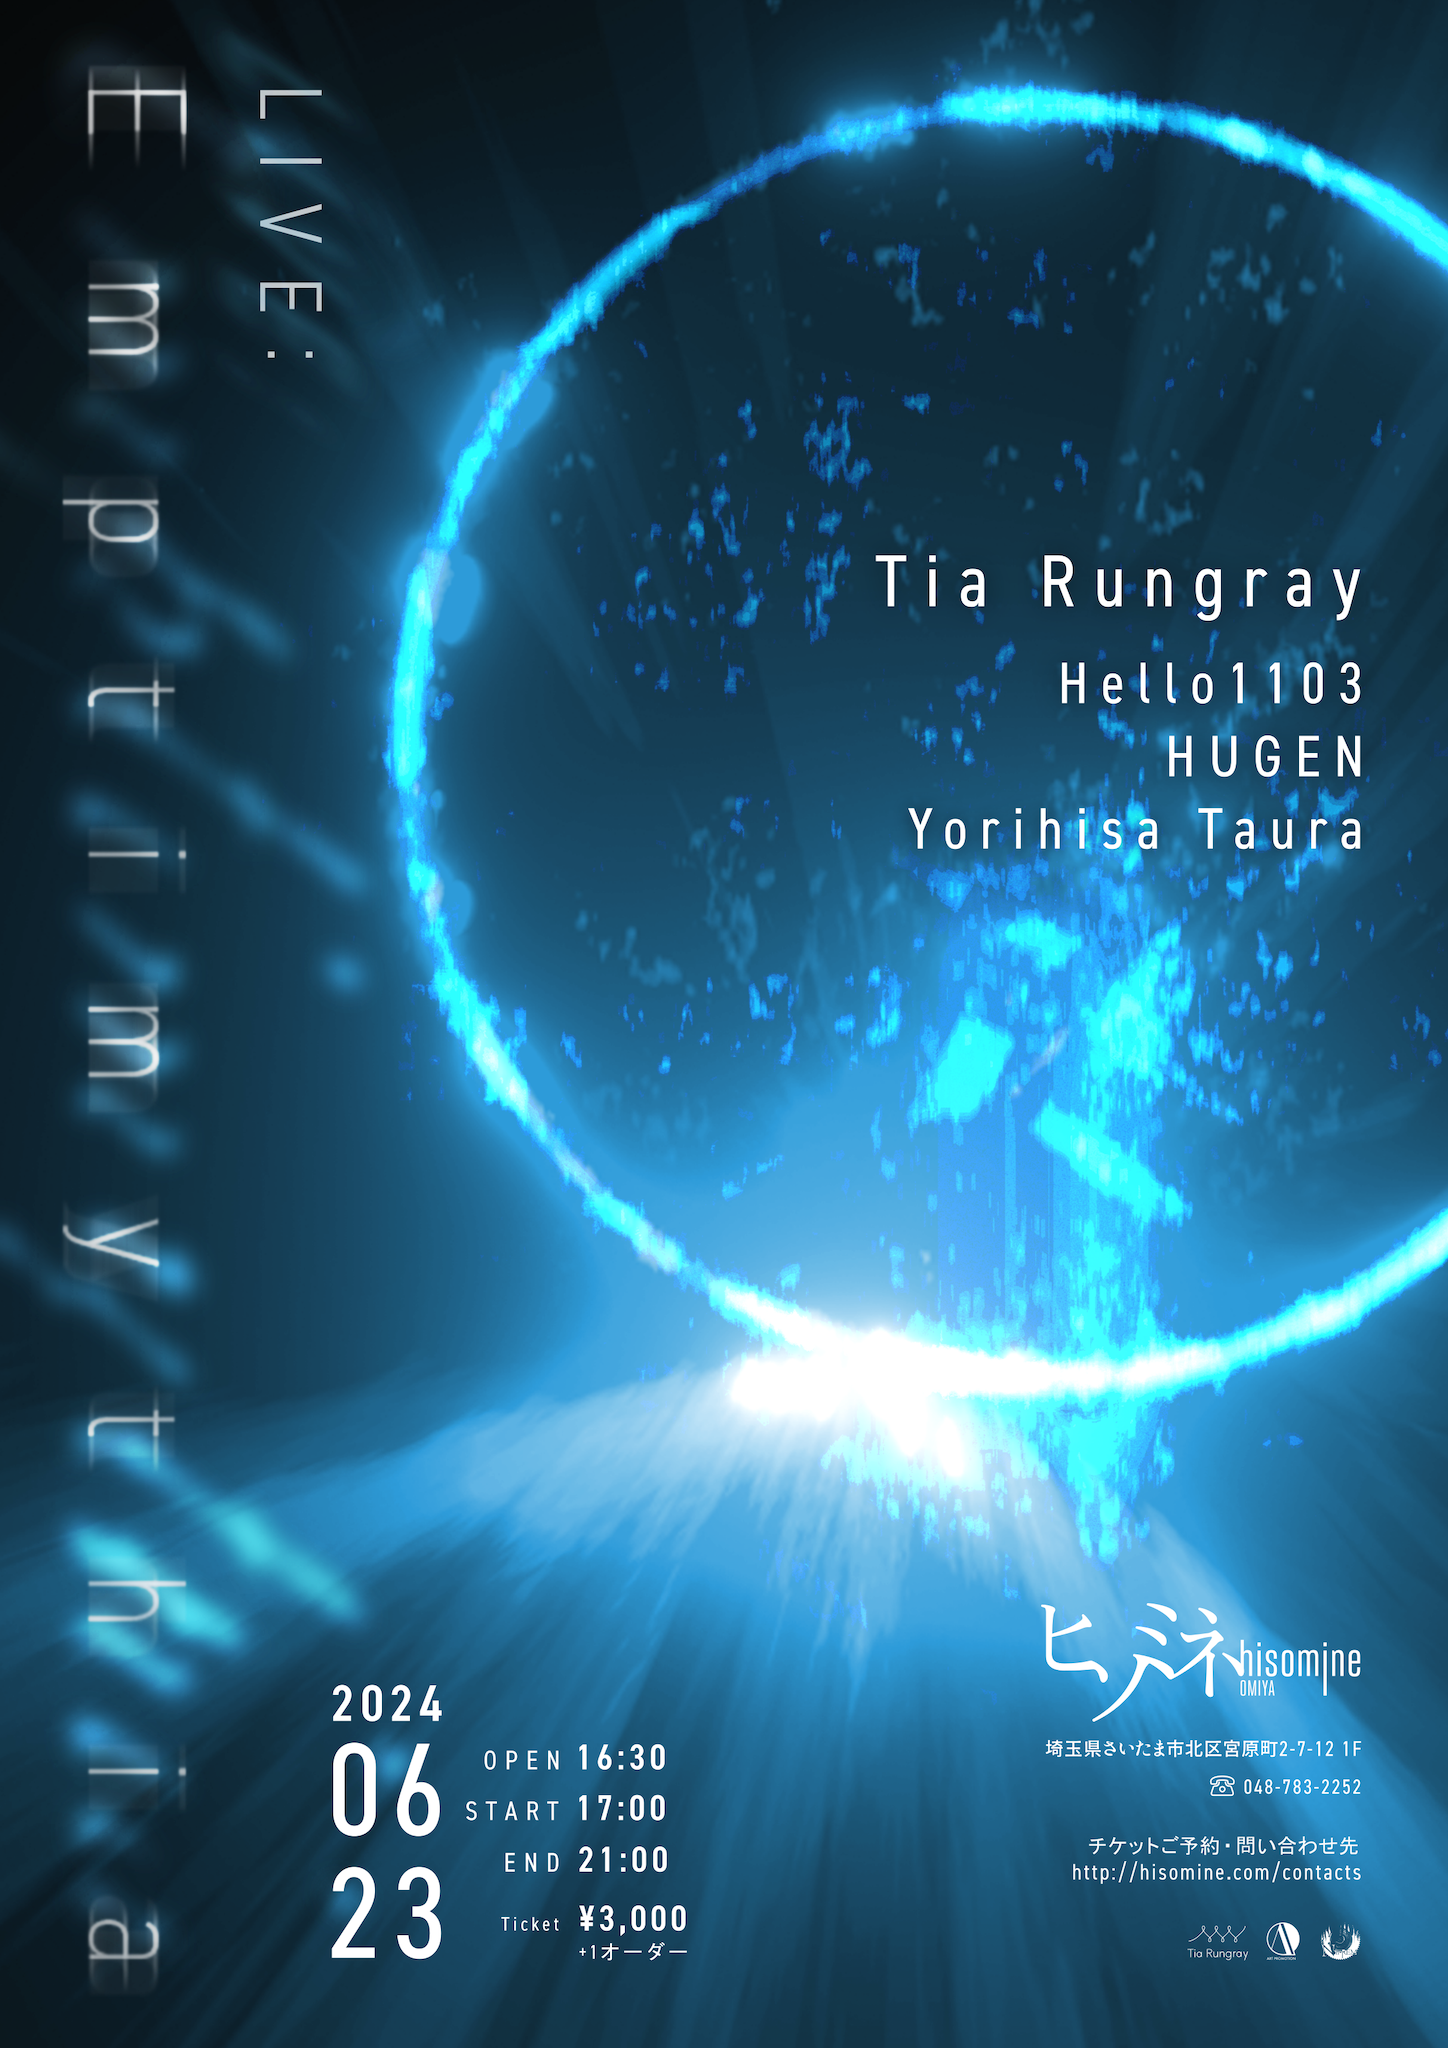 Tia Rungray LIVE: Emptimythia in hisomine || 06232024 LIVE MUSIC with “Piano & Noise”